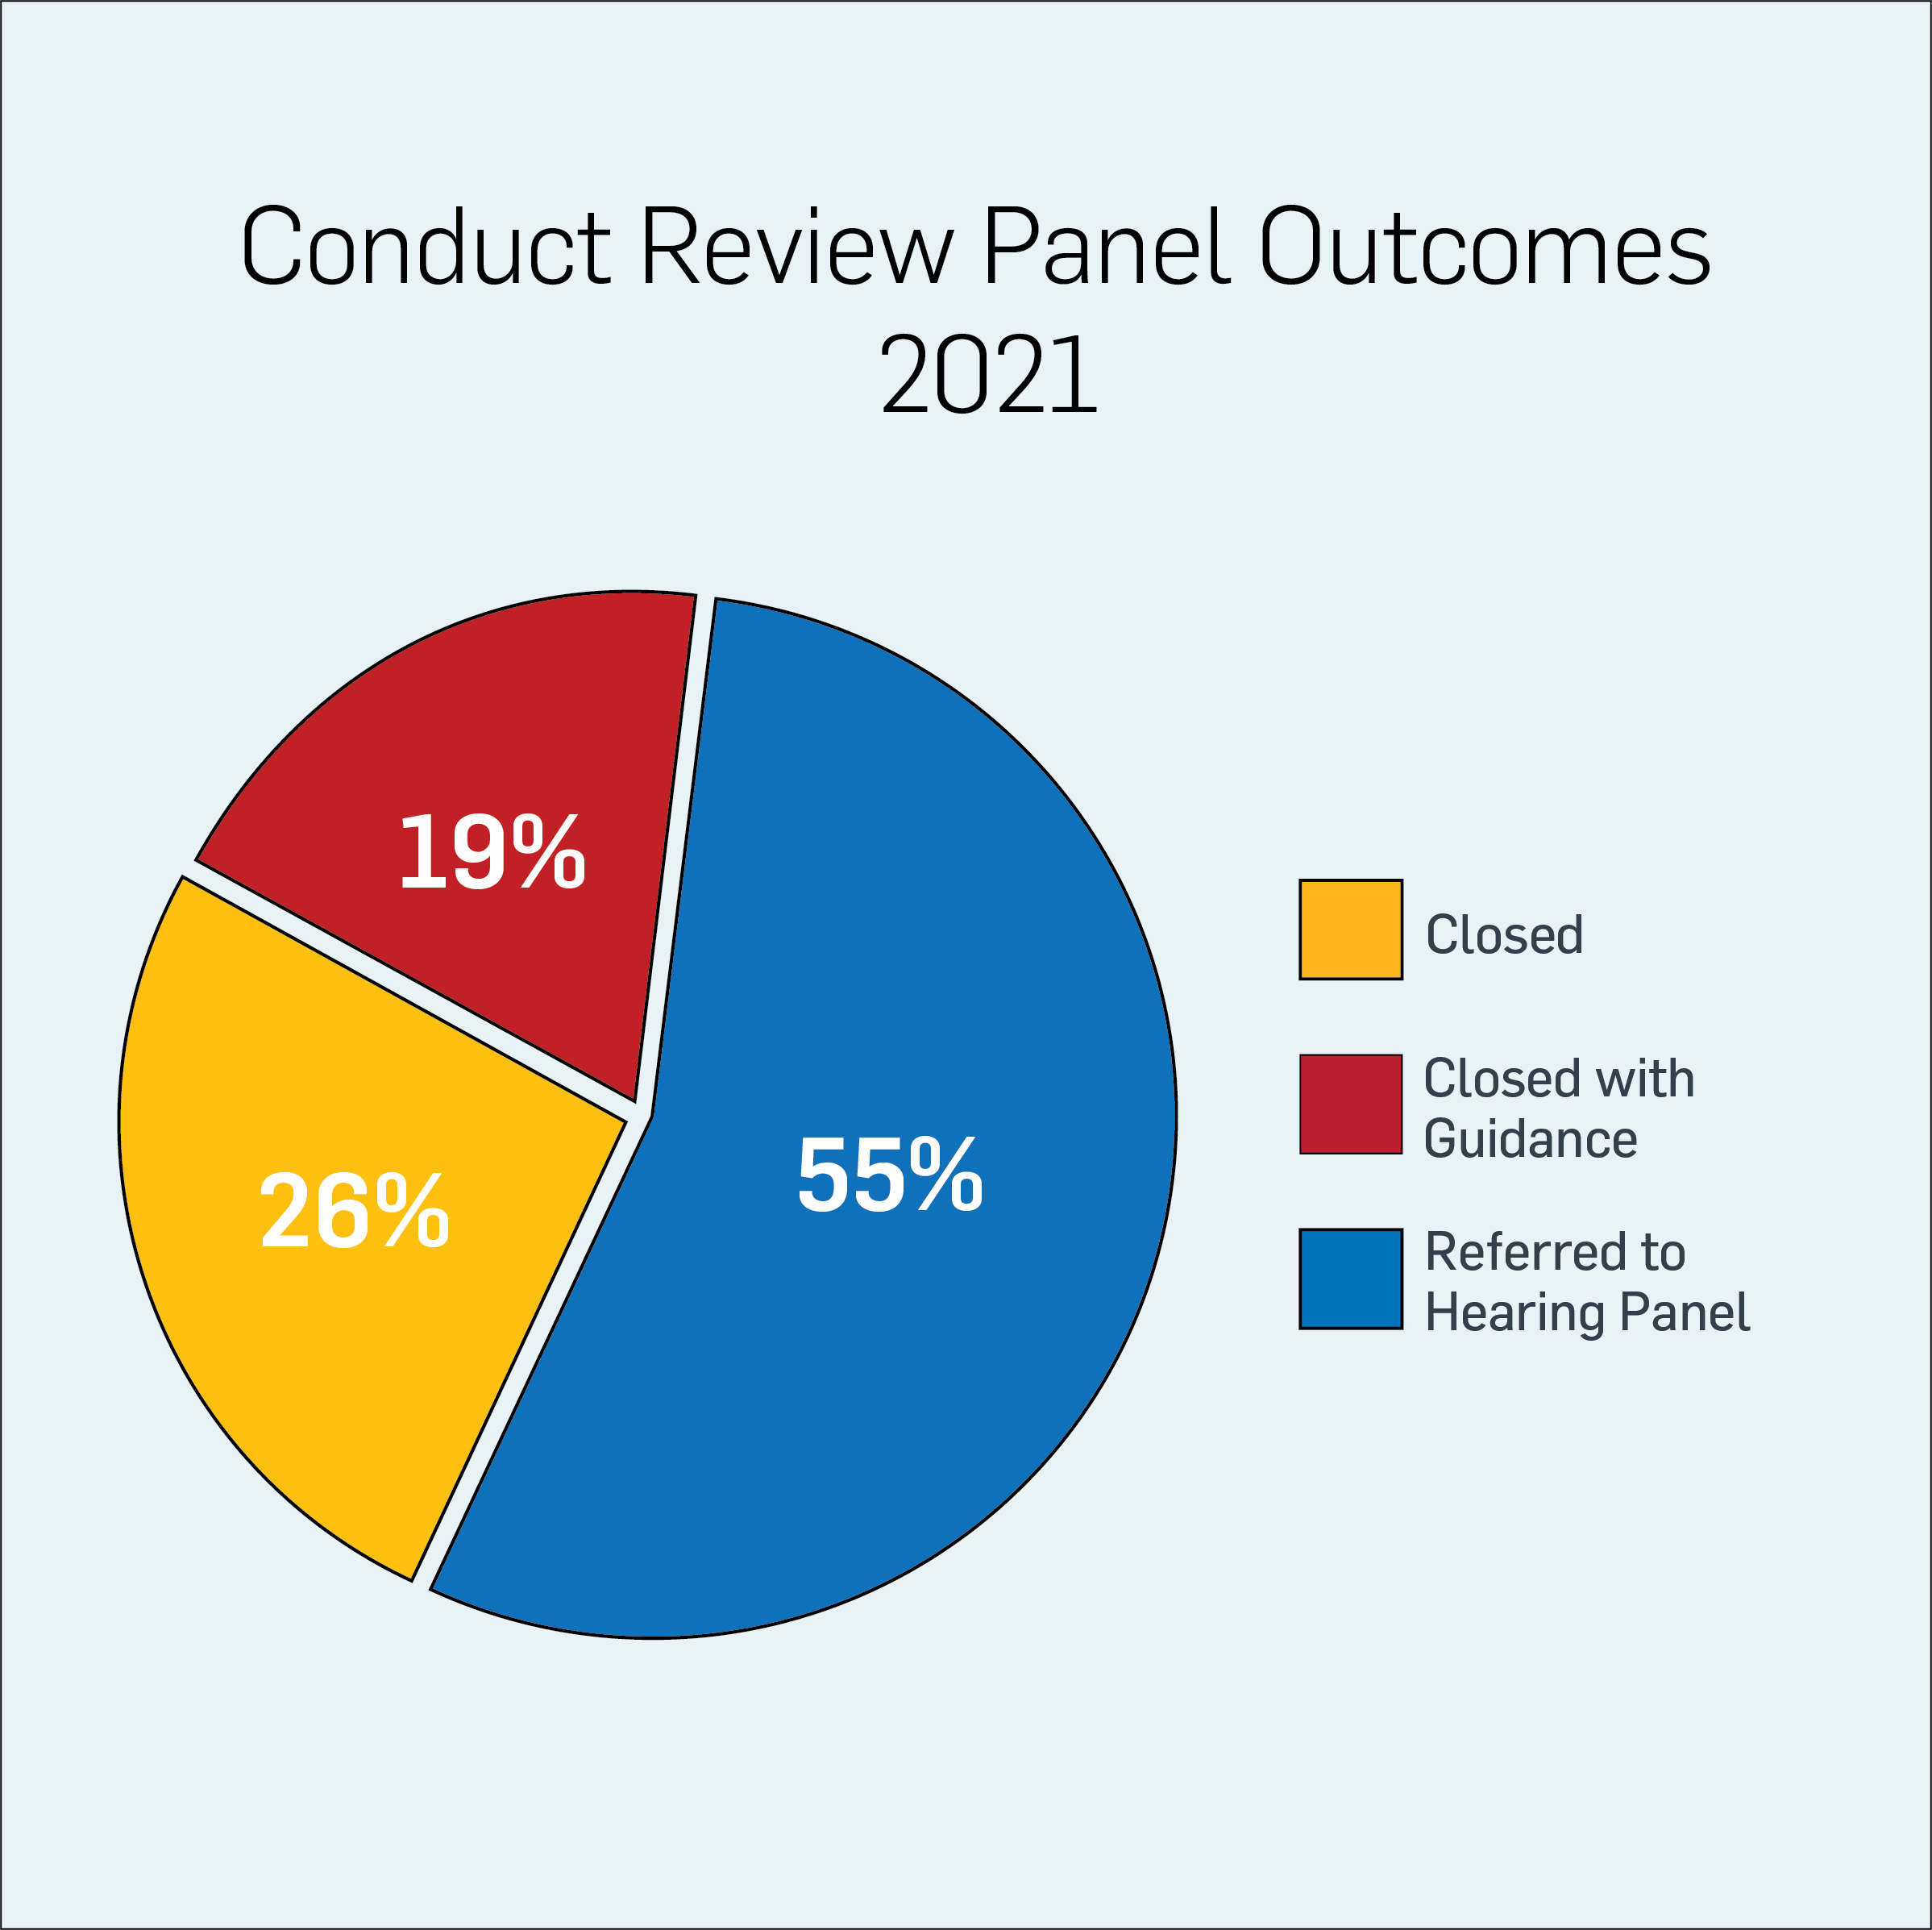 Infographic showing breakdown of Conduct Review Panel outcomes in 2021: 26% closed, 19% closed with guidance, and 55% referred to hearing panel.